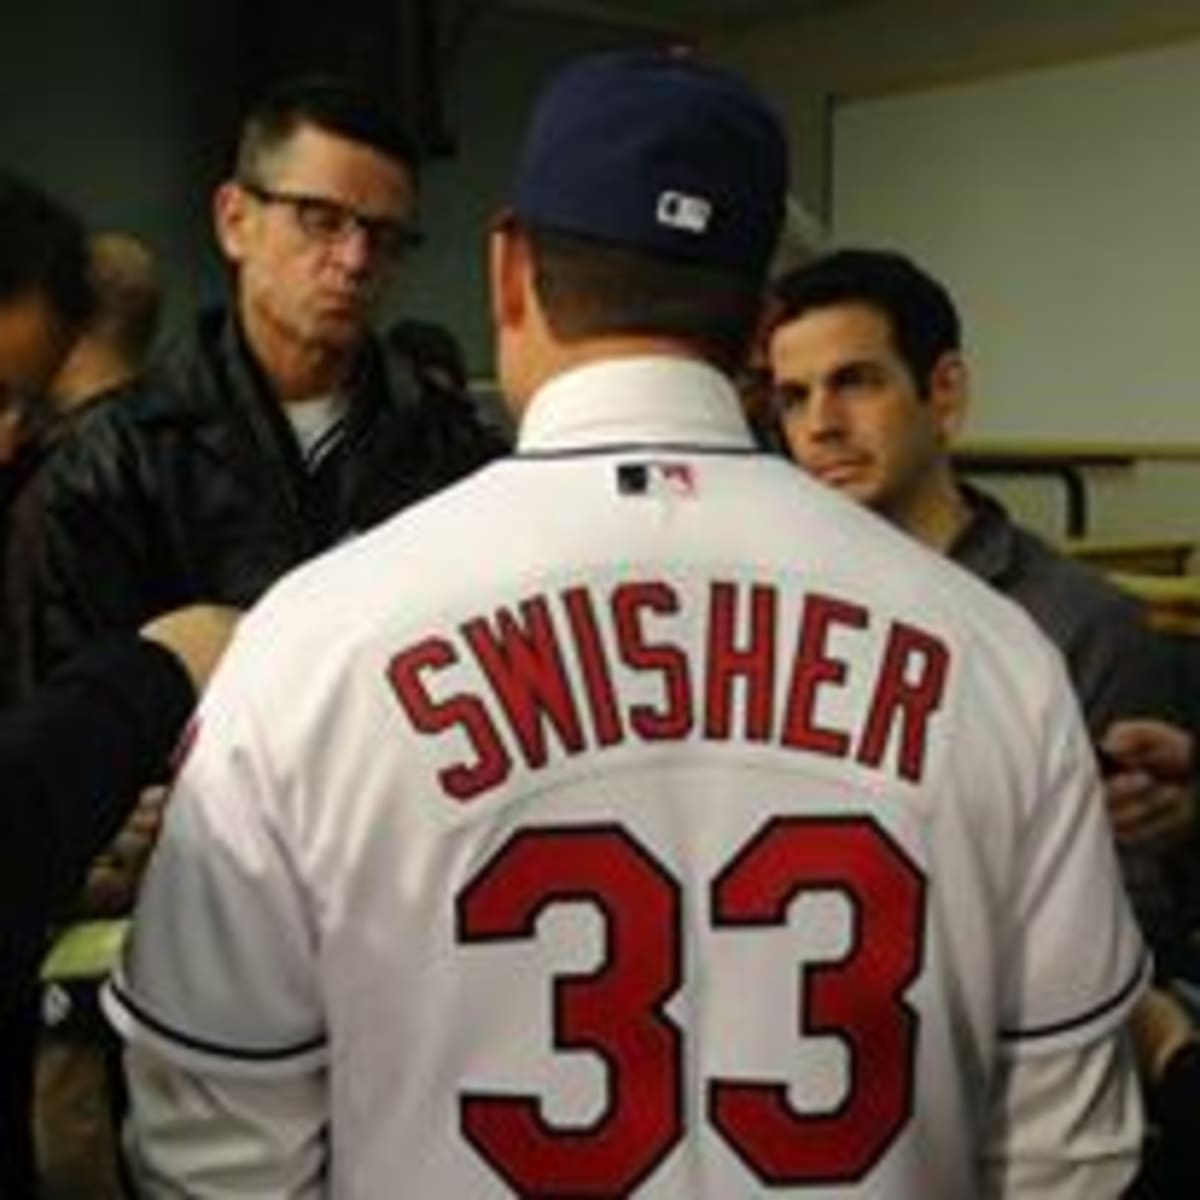 Former Cleveland Indians outfielder Nick Swisher announces retirement